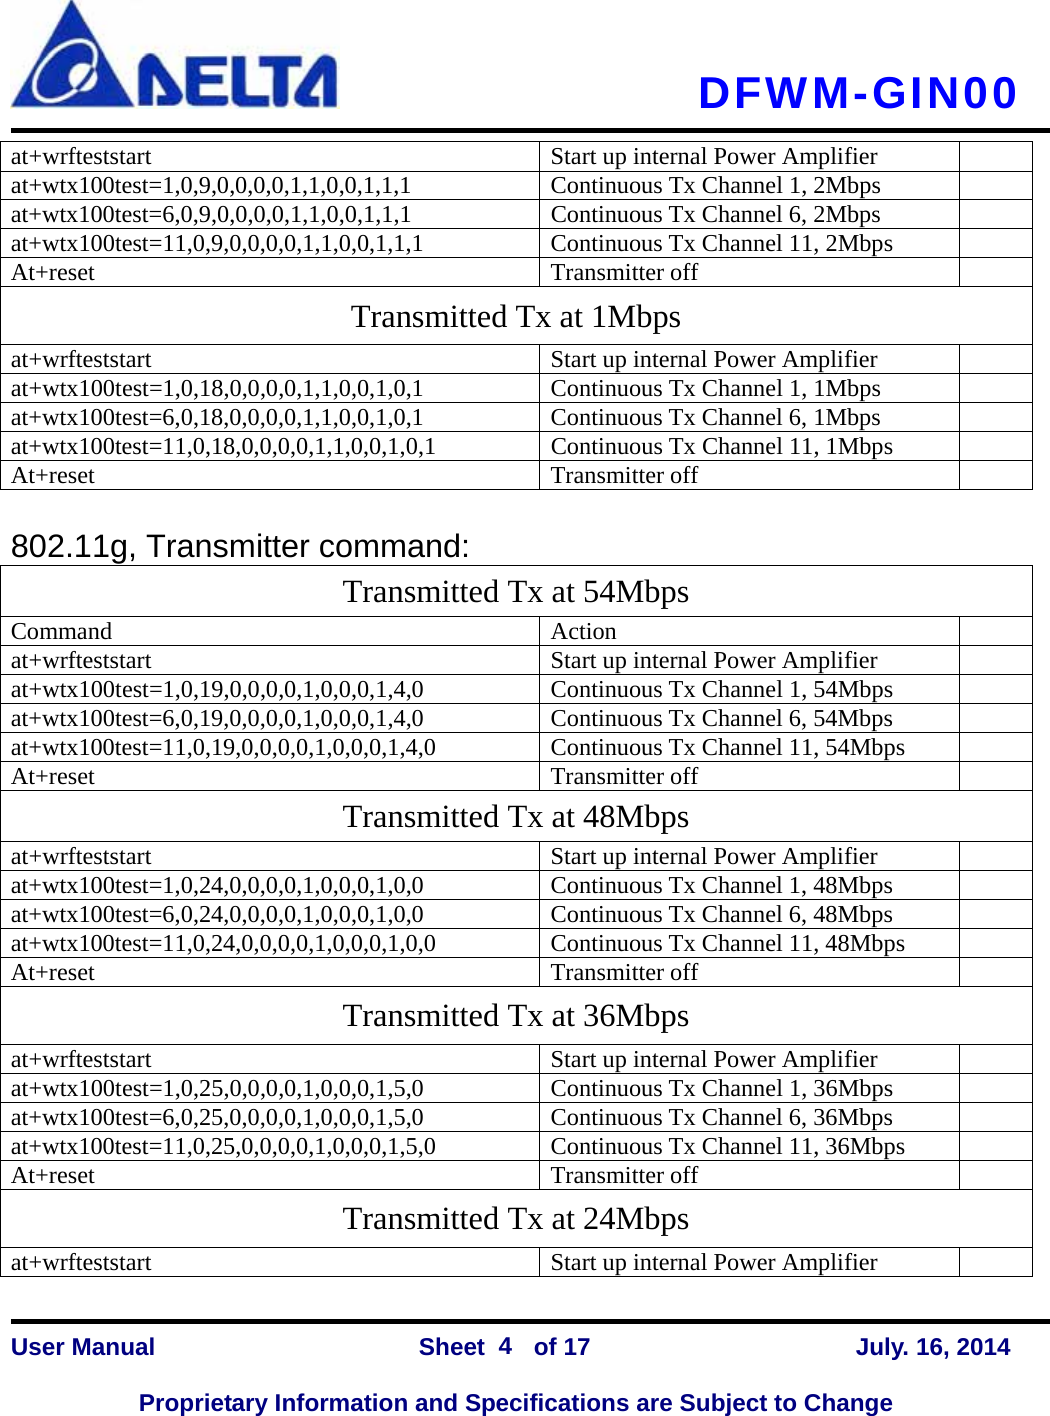   DFWM-GIN00    User Manual                Sheet    of 17      July. 16, 2014  Proprietary Information and Specifications are Subject to Change 4 at+wrfteststart  Start up internal Power Amplifier   at+wtx100test=1,0,9,0,0,0,0,1,1,0,0,1,1,1 Continuous Tx Channel 1, 2Mbps   at+wtx100test=6,0,9,0,0,0,0,1,1,0,0,1,1,1  Continuous Tx Channel 6, 2Mbps   at+wtx100test=11,0,9,0,0,0,0,1,1,0,0,1,1,1  Continuous Tx Channel 11, 2Mbps   At+reset Transmitter off  Transmitted Tx at 1Mbps at+wrfteststart  Start up internal Power Amplifier   at+wtx100test=1,0,18,0,0,0,0,1,1,0,0,1,0,1 Continuous Tx Channel 1, 1Mbps   at+wtx100test=6,0,18,0,0,0,0,1,1,0,0,1,0,1  Continuous Tx Channel 6, 1Mbps   at+wtx100test=11,0,18,0,0,0,0,1,1,0,0,1,0,1  Continuous Tx Channel 11, 1Mbps   At+reset Transmitter off   802.11g, Transmitter command: Transmitted Tx at 54Mbps Command Action  at+wrfteststart  Start up internal Power Amplifier   at+wtx100test=1,0,19,0,0,0,0,1,0,0,0,1,4,0 Continuous Tx Channel 1, 54Mbps   at+wtx100test=6,0,19,0,0,0,0,1,0,0,0,1,4,0  Continuous Tx Channel 6, 54Mbps   at+wtx100test=11,0,19,0,0,0,0,1,0,0,0,1,4,0  Continuous Tx Channel 11, 54Mbps   At+reset Transmitter off  Transmitted Tx at 48Mbps at+wrfteststart  Start up internal Power Amplifier   at+wtx100test=1,0,24,0,0,0,0,1,0,0,0,1,0,0  Continuous Tx Channel 1, 48Mbps   at+wtx100test=6,0,24,0,0,0,0,1,0,0,0,1,0,0  Continuous Tx Channel 6, 48Mbps   at+wtx100test=11,0,24,0,0,0,0,1,0,0,0,1,0,0  Continuous Tx Channel 11, 48Mbps   At+reset Transmitter off  Transmitted Tx at 36Mbps at+wrfteststart  Start up internal Power Amplifier   at+wtx100test=1,0,25,0,0,0,0,1,0,0,0,1,5,0 Continuous Tx Channel 1, 36Mbps   at+wtx100test=6,0,25,0,0,0,0,1,0,0,0,1,5,0  Continuous Tx Channel 6, 36Mbps   at+wtx100test=11,0,25,0,0,0,0,1,0,0,0,1,5,0  Continuous Tx Channel 11, 36Mbps   At+reset Transmitter off  Transmitted Tx at 24Mbps at+wrfteststart  Start up internal Power Amplifier   